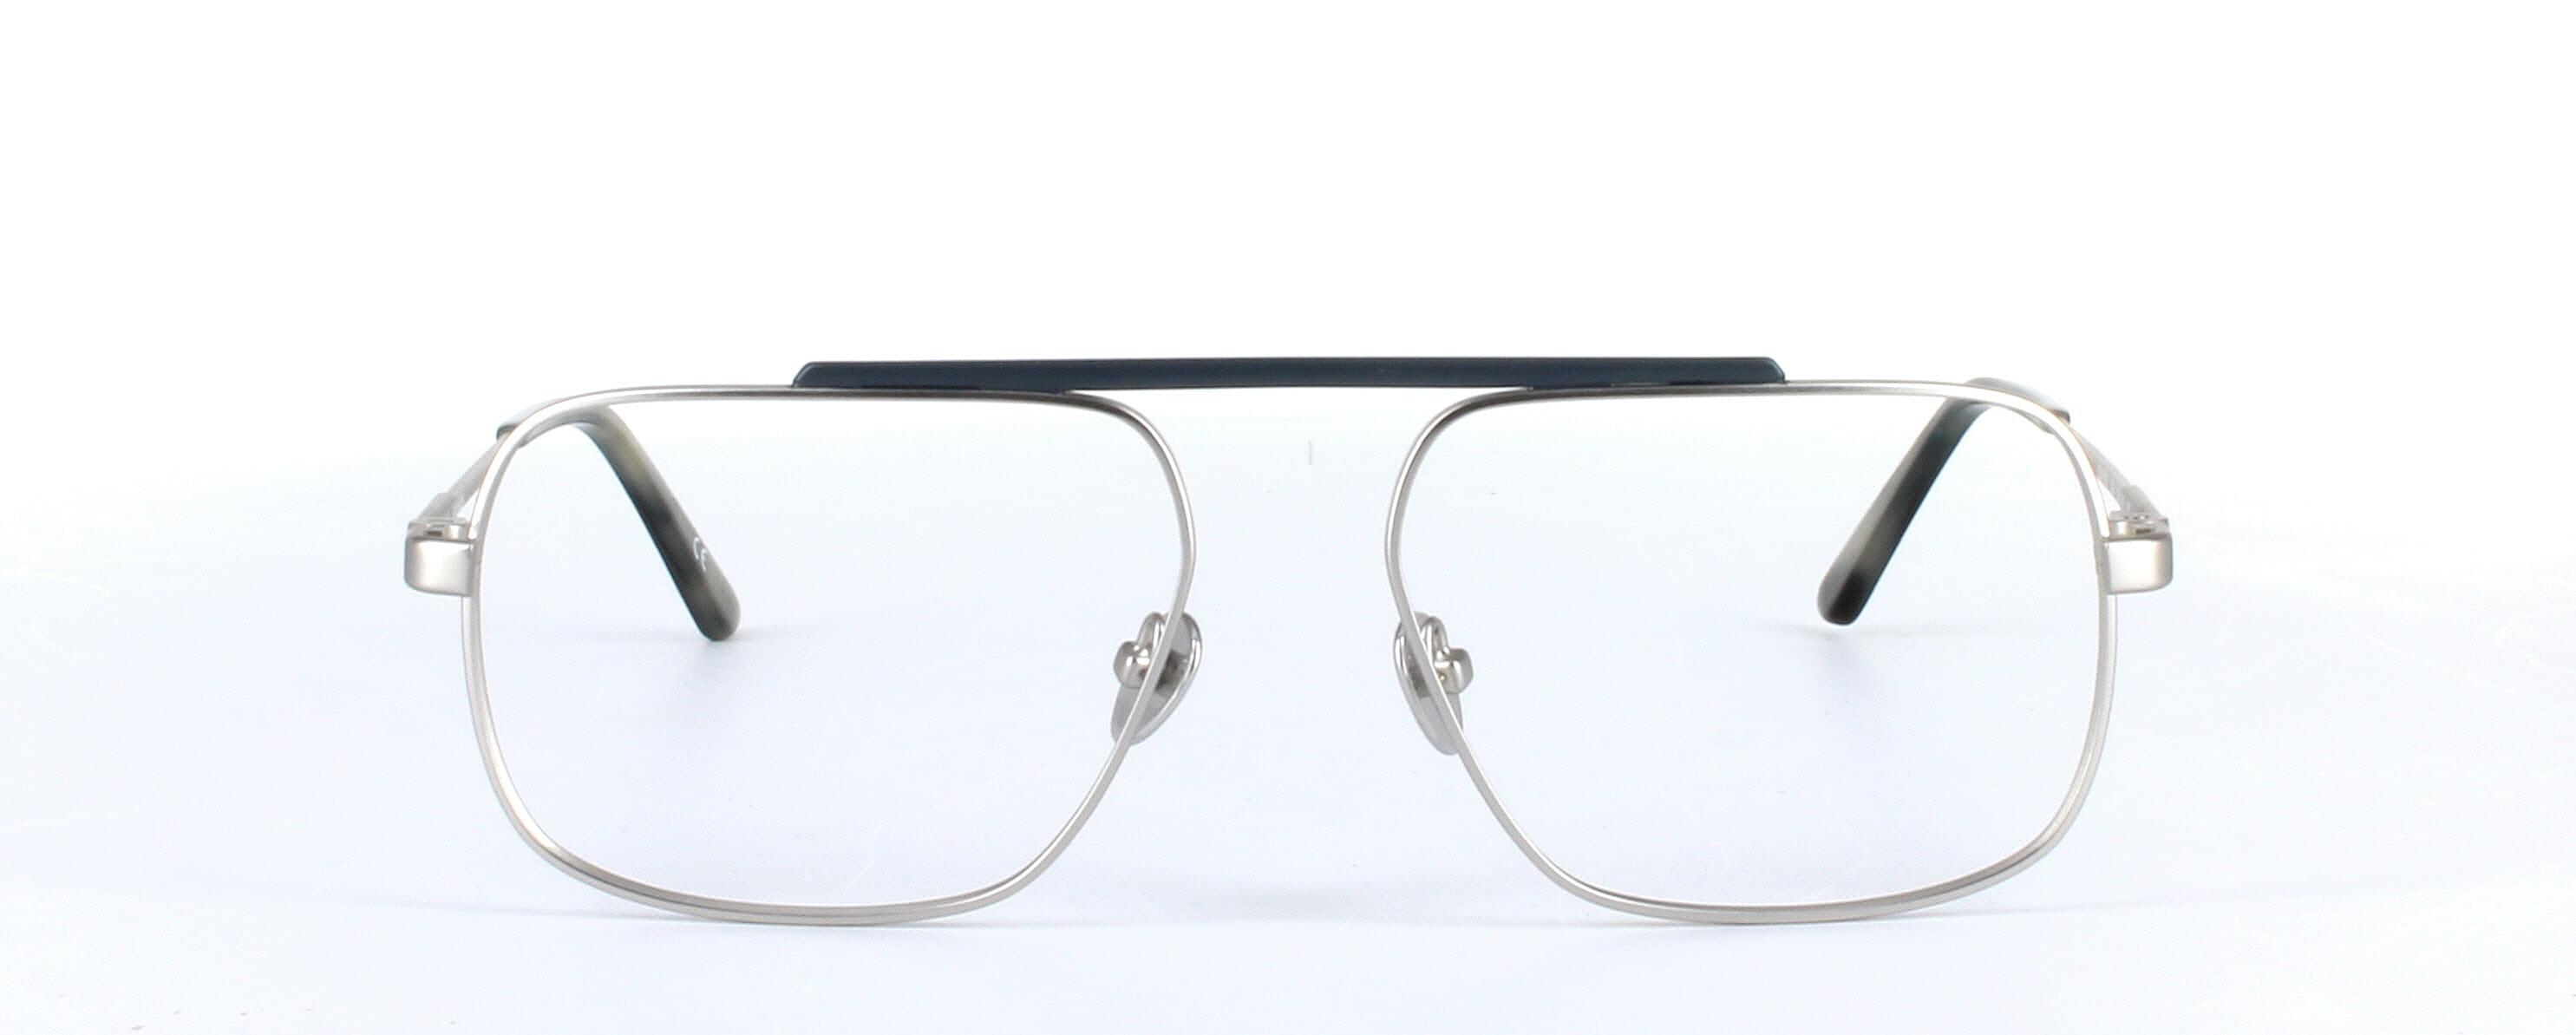 CK 18106in Silver | Cheap Glasses Online | Glasses2You